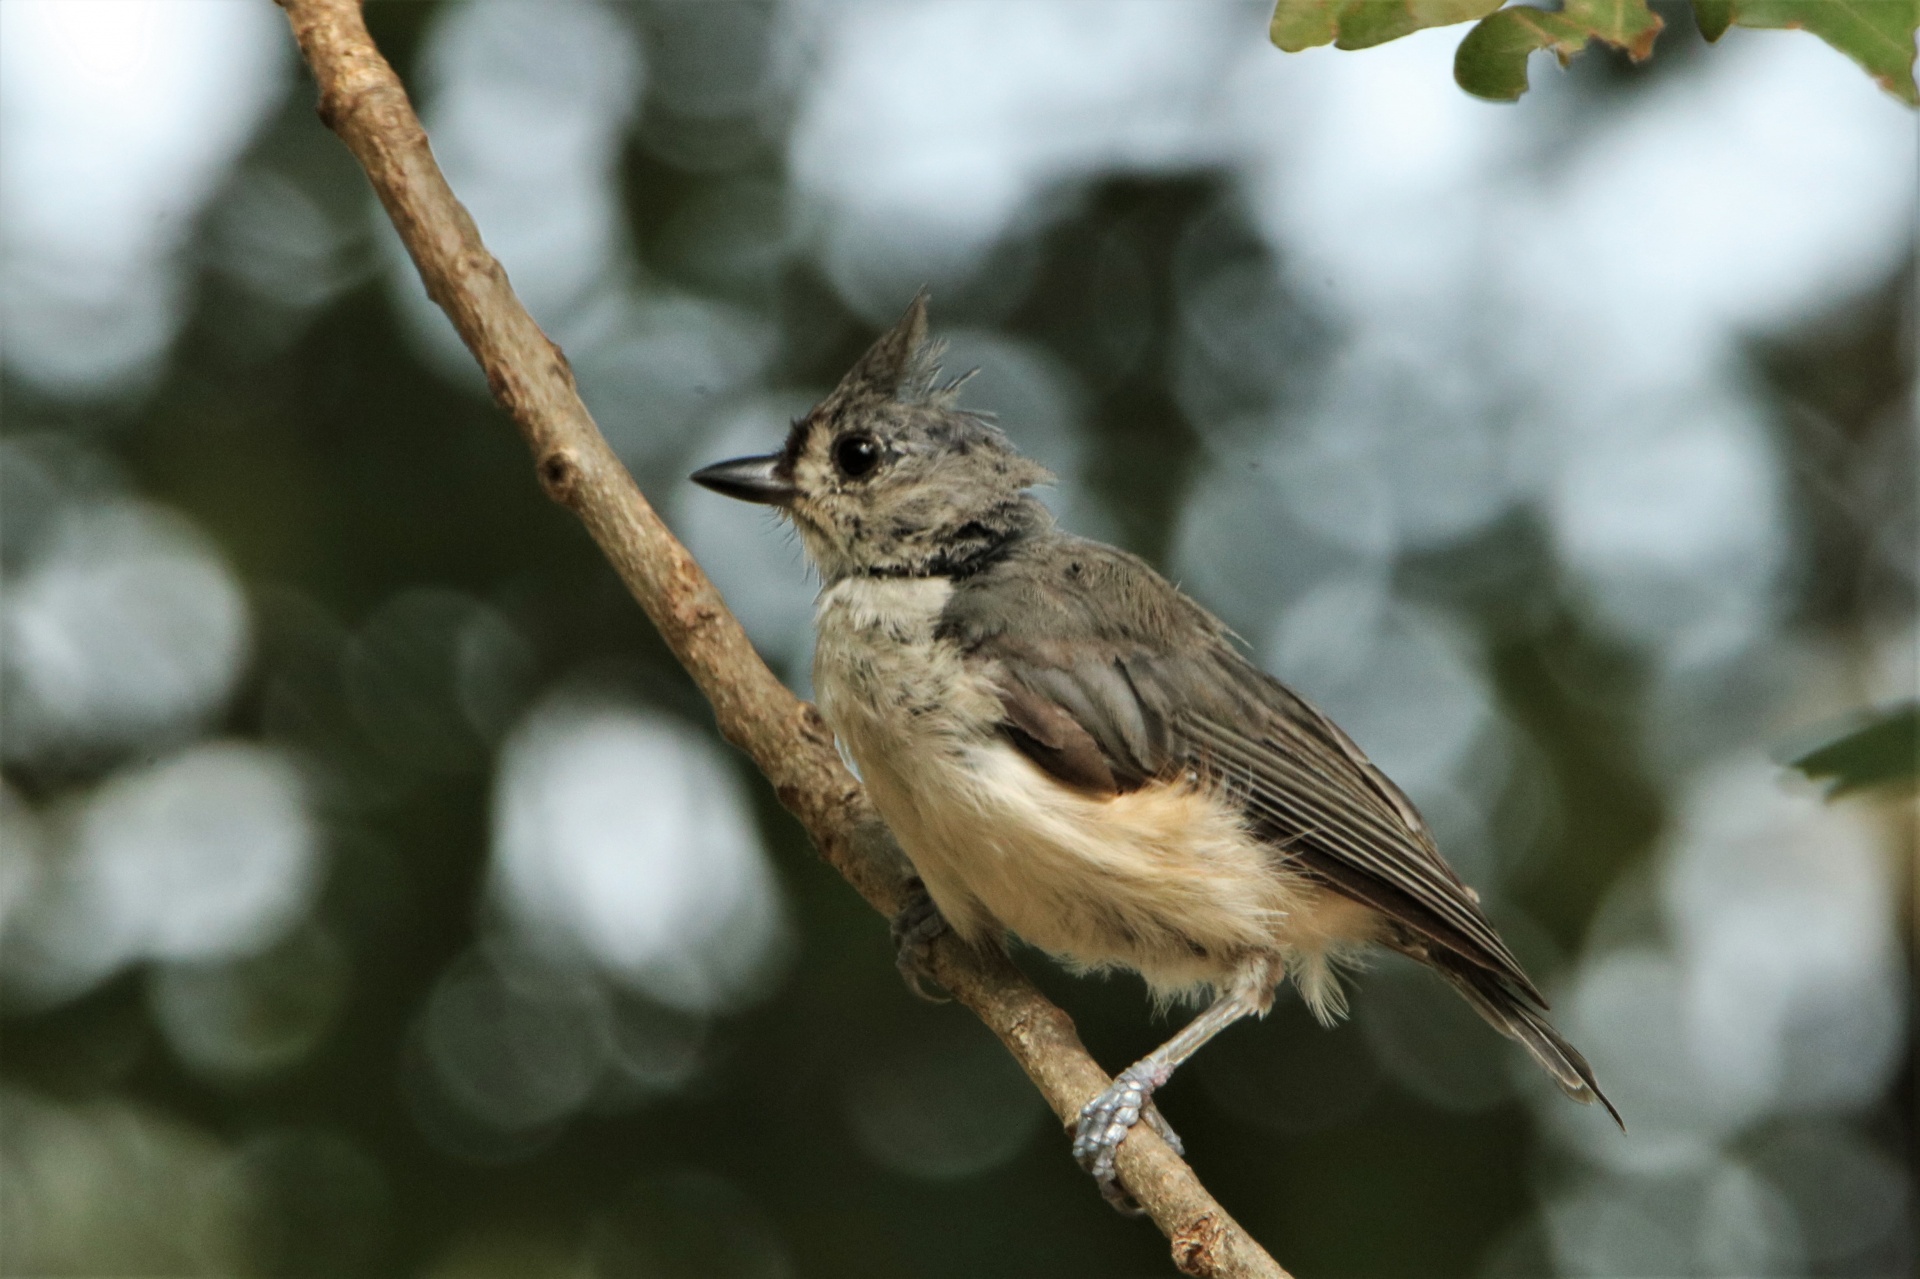 Young Tufted Titmouse On Branch